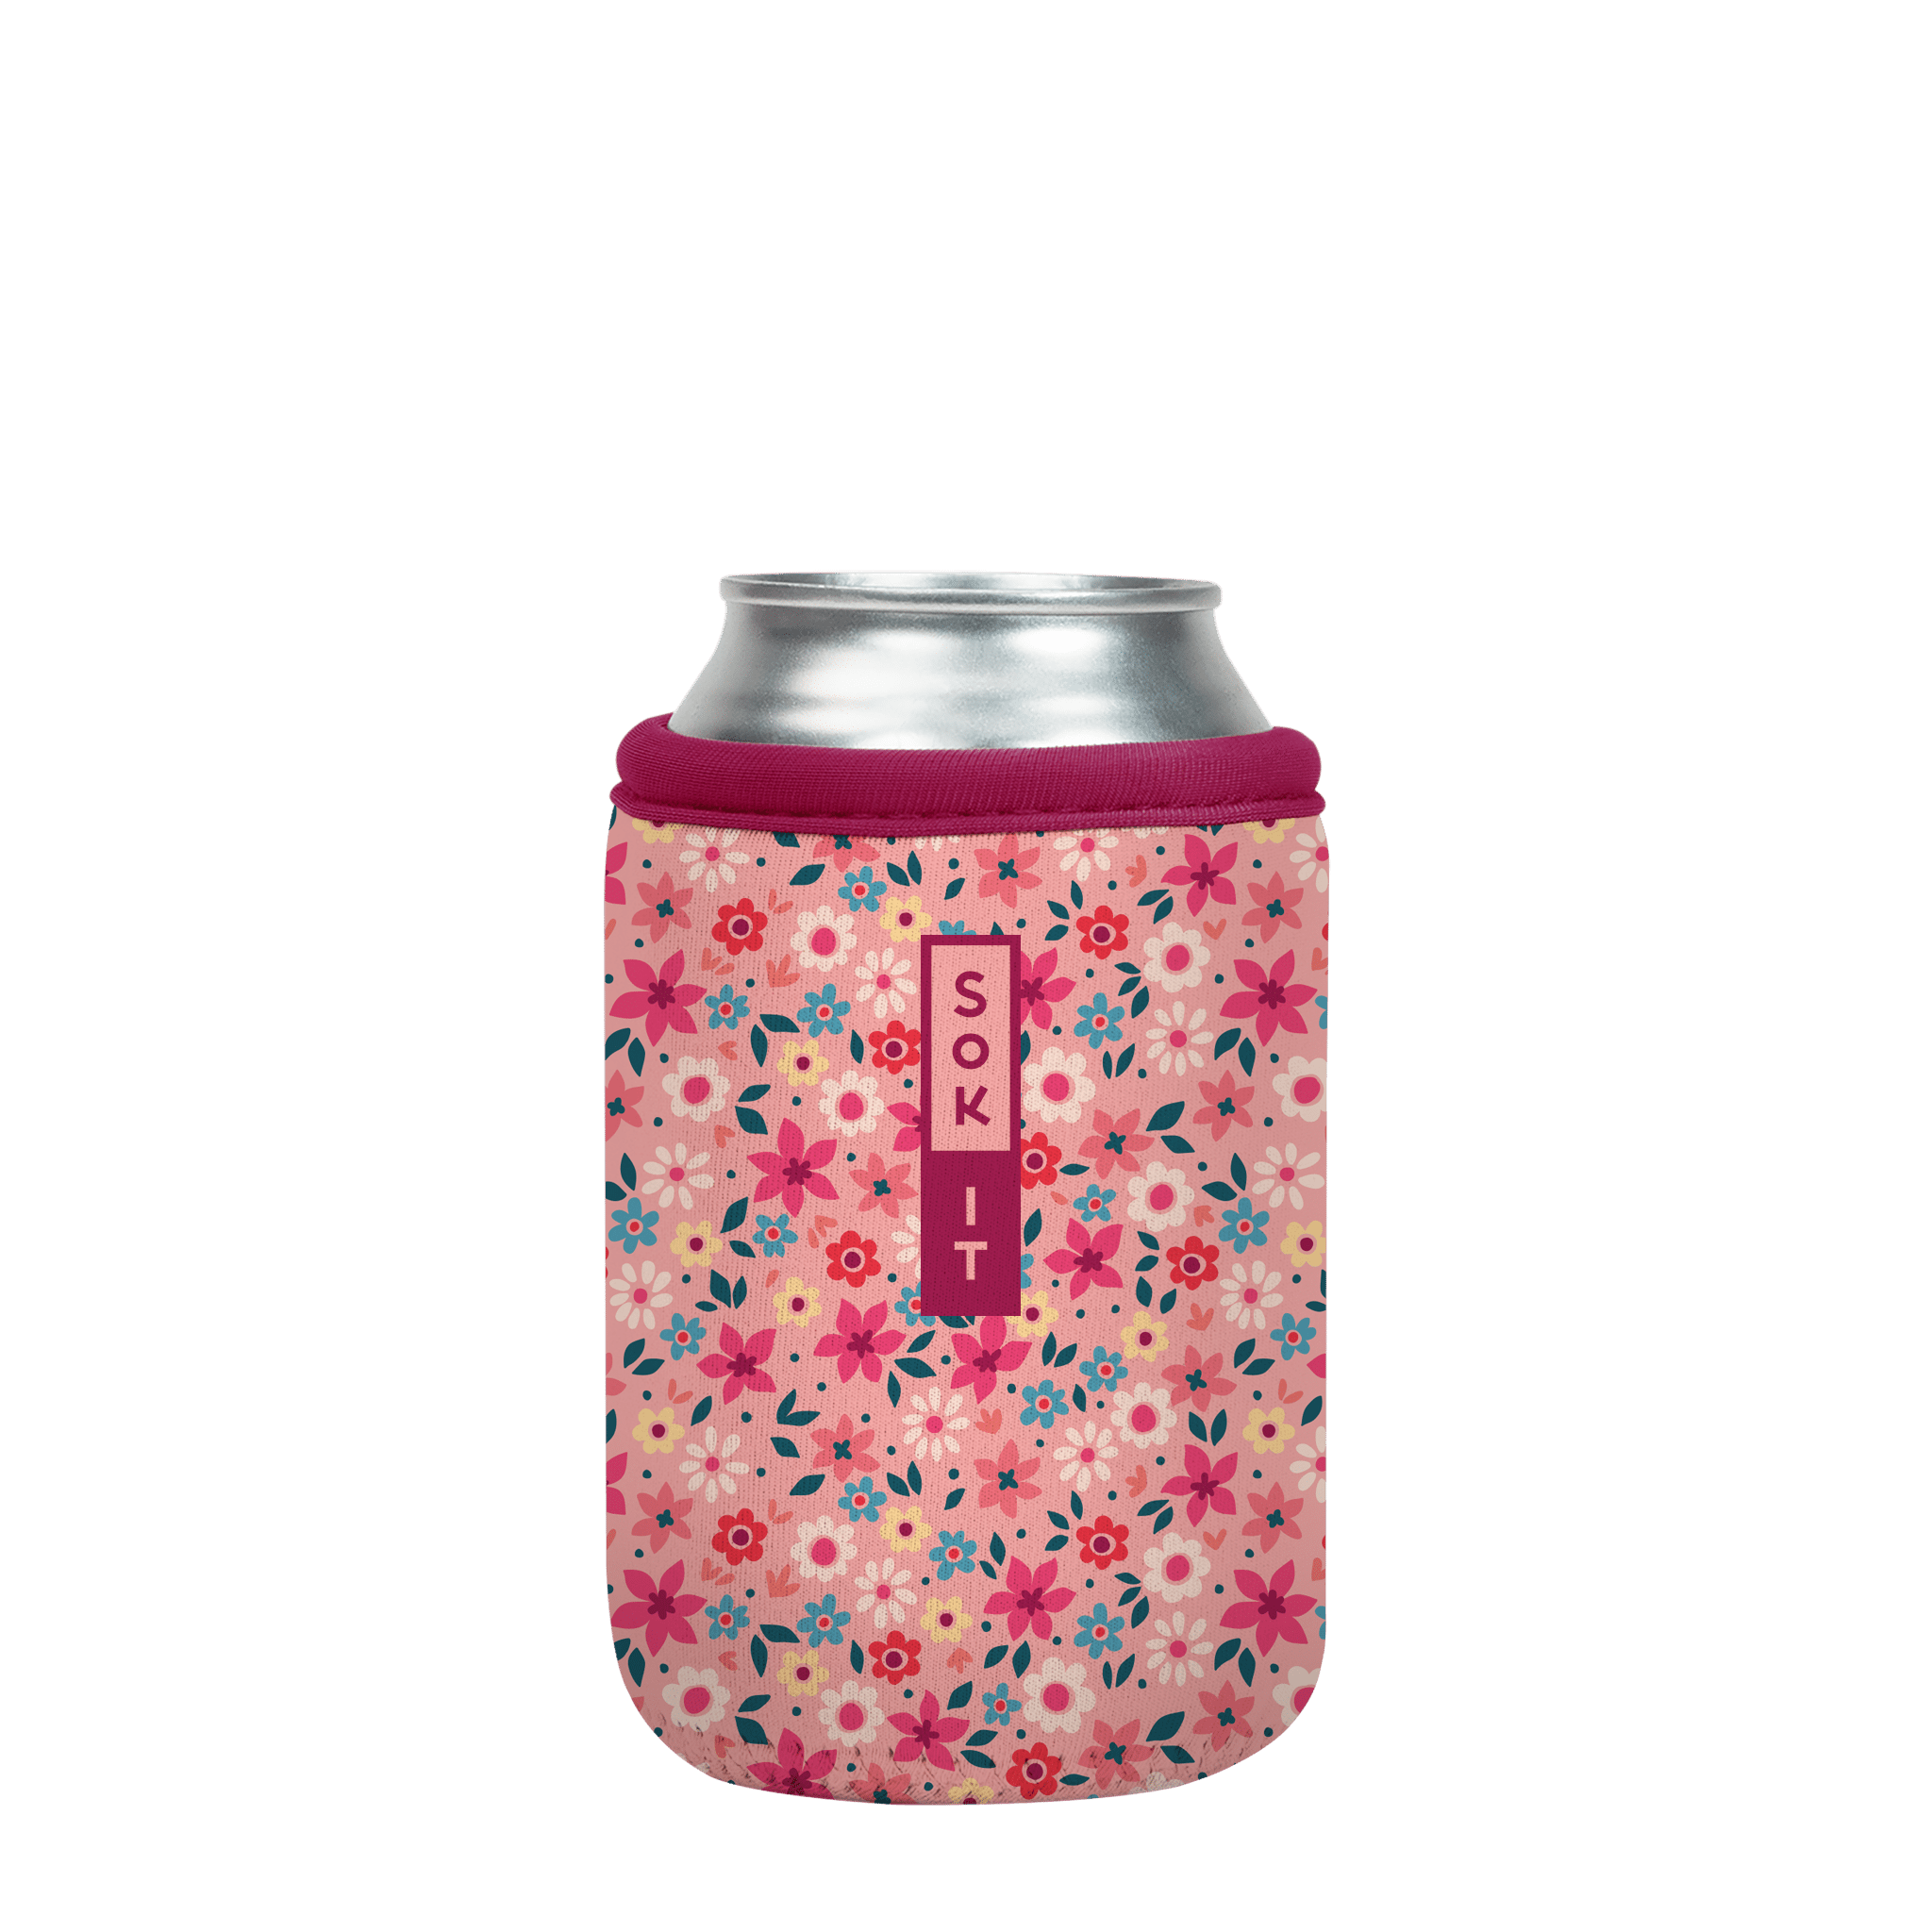 CanSok-Floral Spring Bouquet 12oz Can